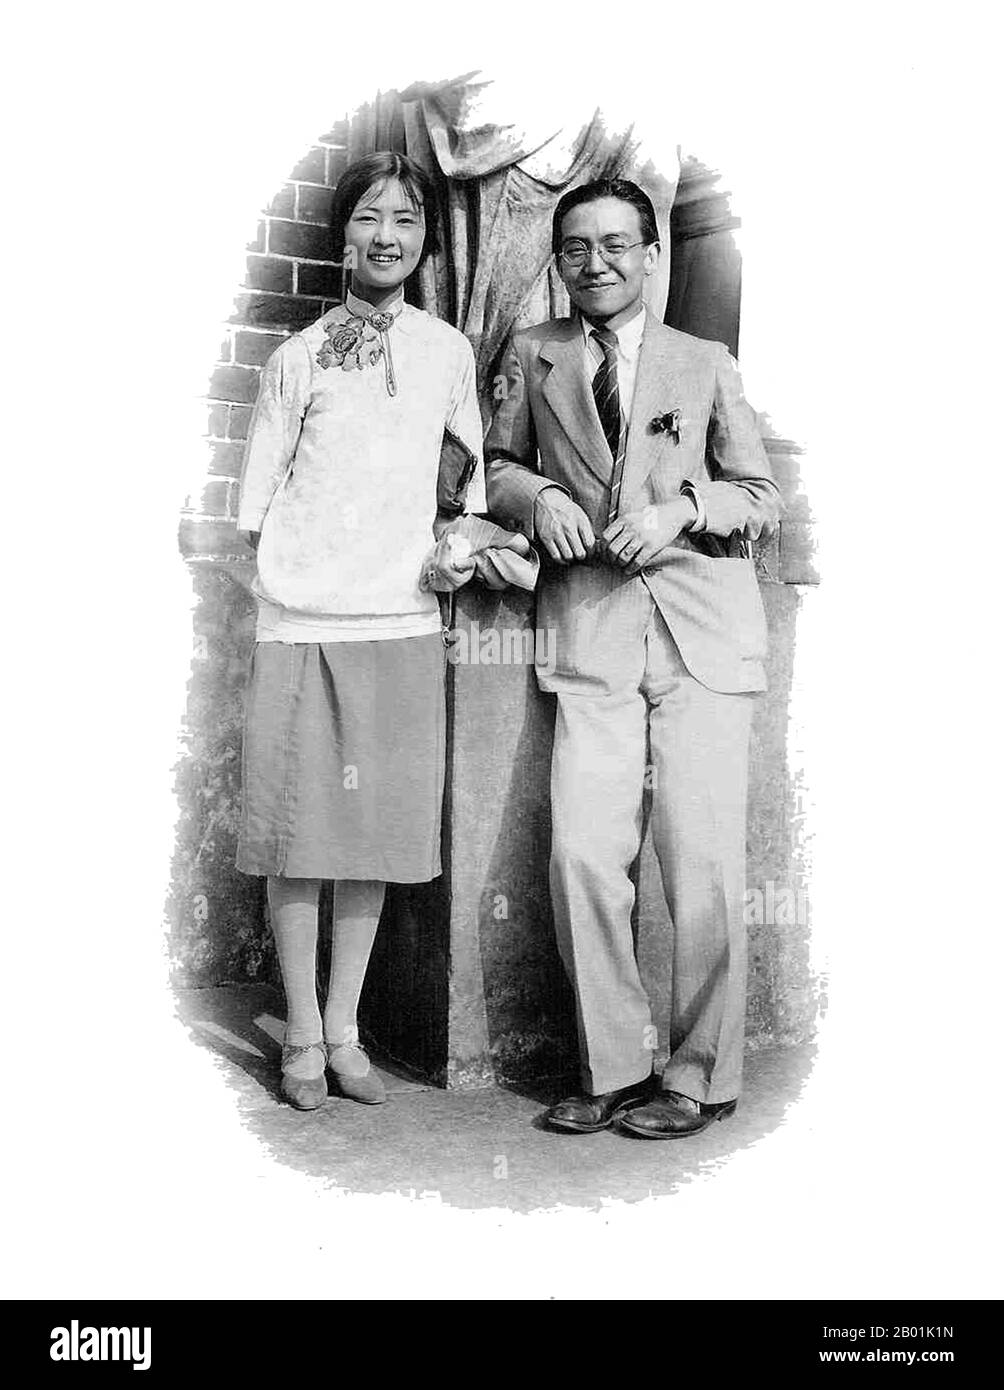 China: Lin Huiyin (10 June 1904 - 1 April 1955), Chinese architect and writer, with her husband Liang Sicheng on their honeymoon in Europe, 1928.  Lin Huiyin, known as Phyllis Lin or Lin Whei-yin when in the United States, was a noted 20th century Chinese architect and writer. She is said to have been the first female architect in China.  She was born in Hangzhou though her family had roots in Minhou, Fujian province. From a rich family, Lin Huiyin received the best education a woman could obtain at that time, studying both in Europe and America. She attended St Mary's College in London. Stock Photo